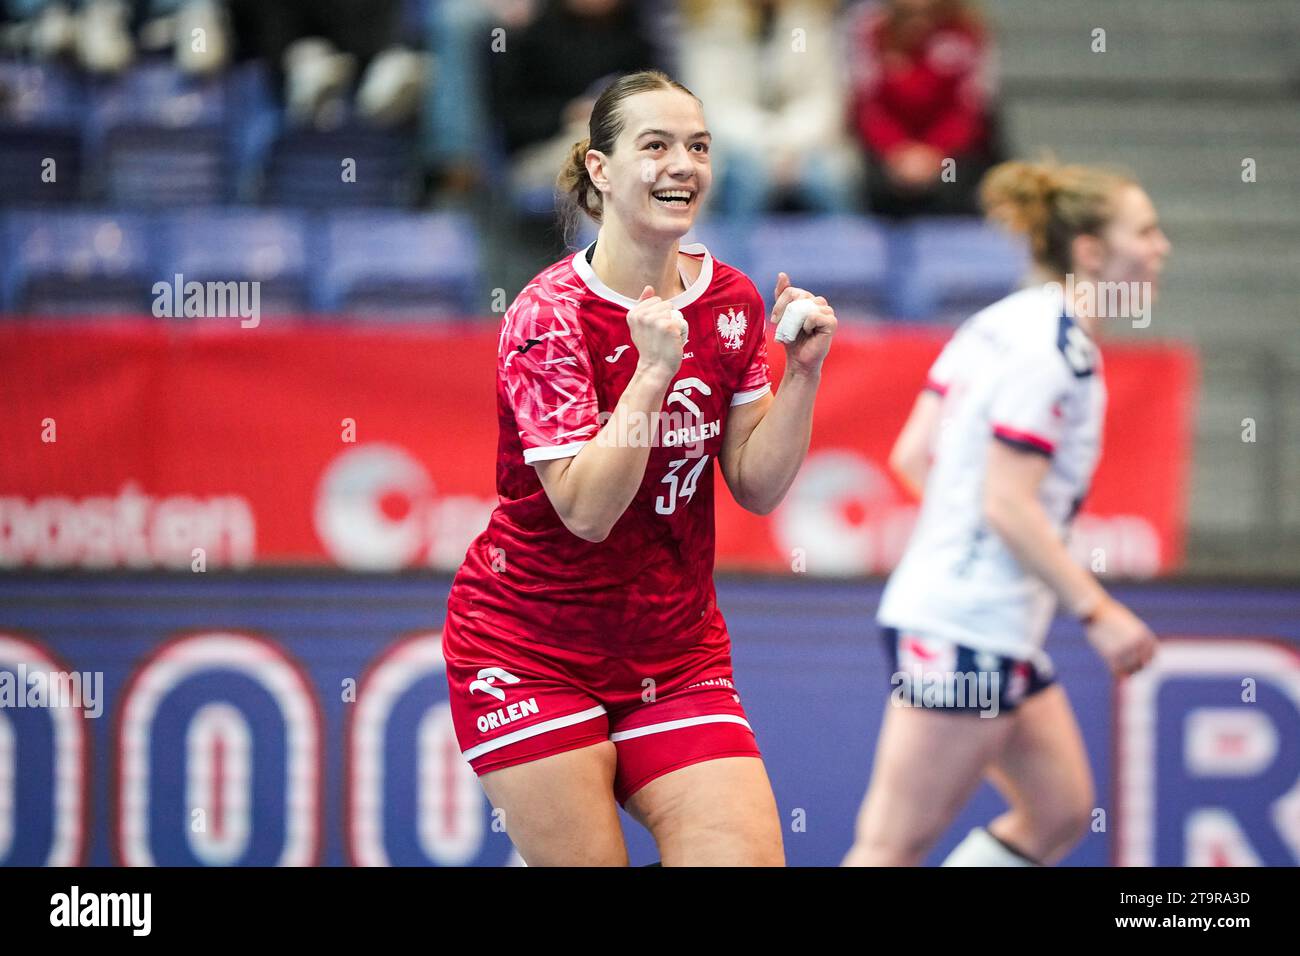 Lillehammer 20231126.Poland's Marlena Urbanska during the international match between Norway and Poland in Haakons Hall, before the woman's handball World Championship in Norway, Sweden and Denmark. Photo: Beate Oma Dahle / NTB Stock Photo